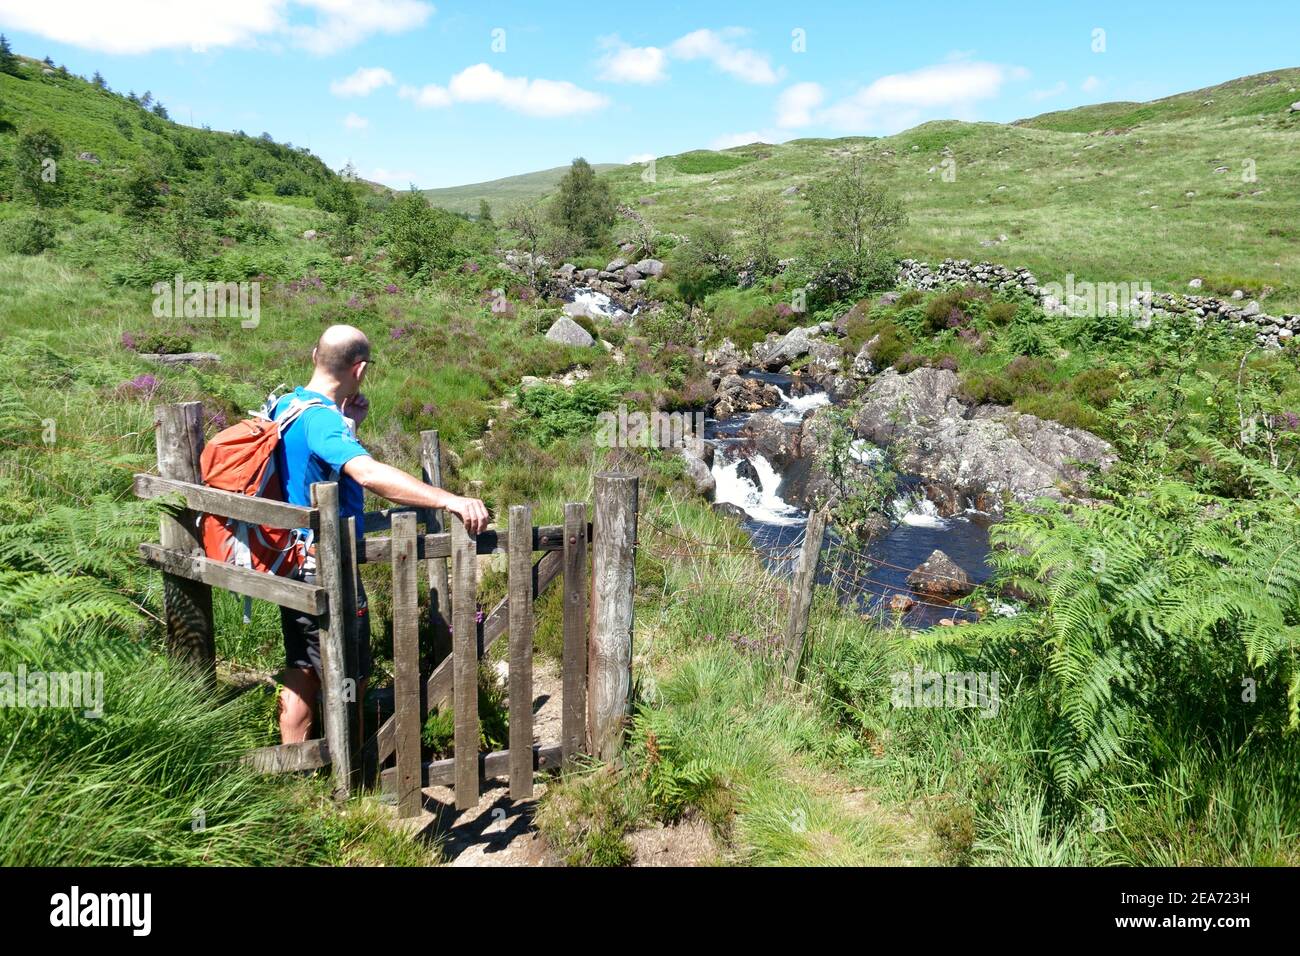 Man going through a gate at the side of the Buchan burn on the route to The Merrick hill through the Galloway Forest Stock Photo